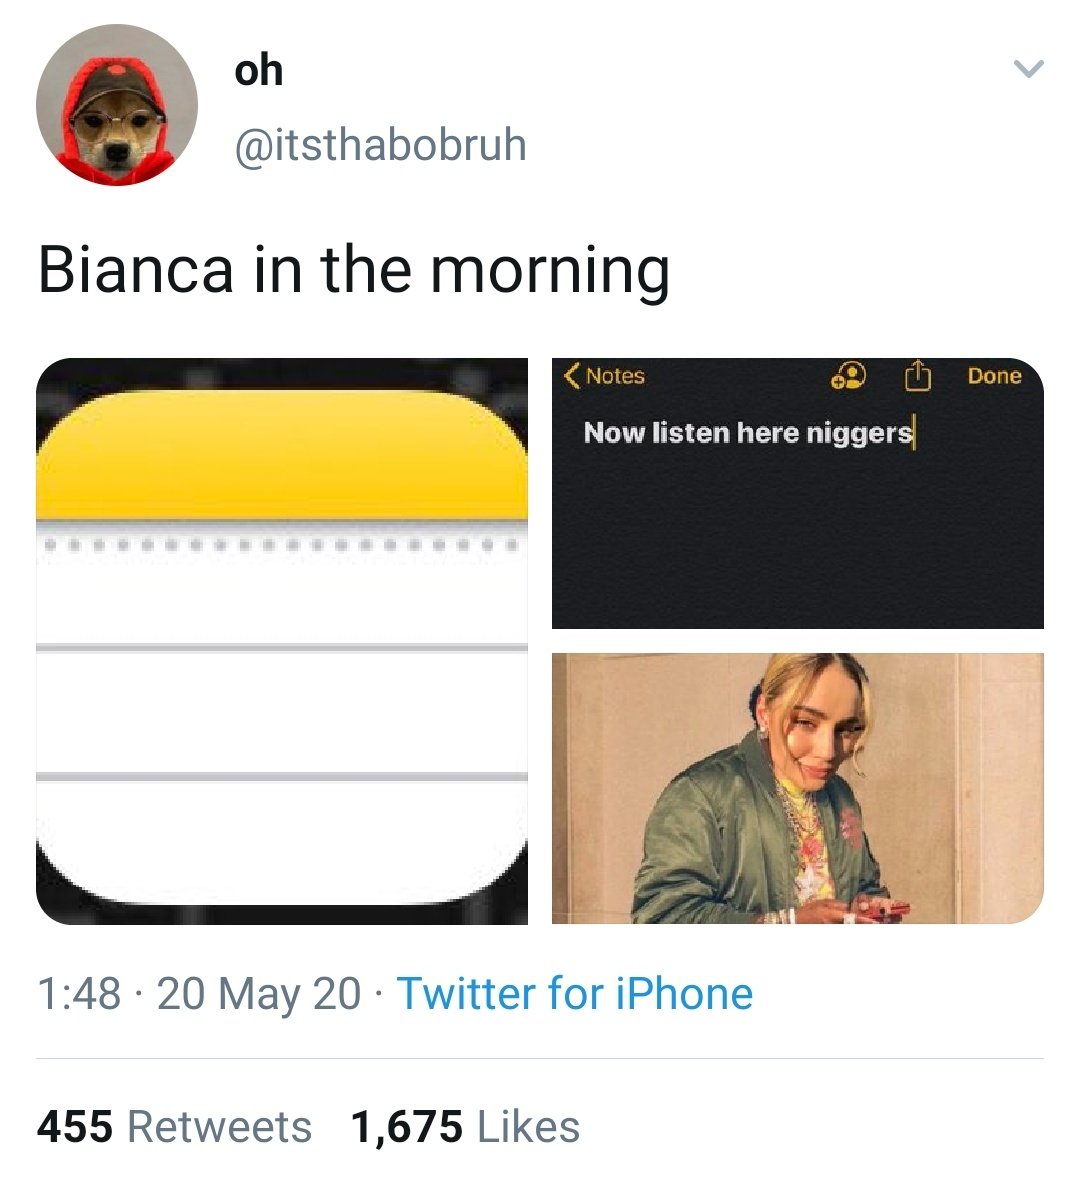 Experienced tweeps predicted that Bianca would tweet a Notes apology in the morning.